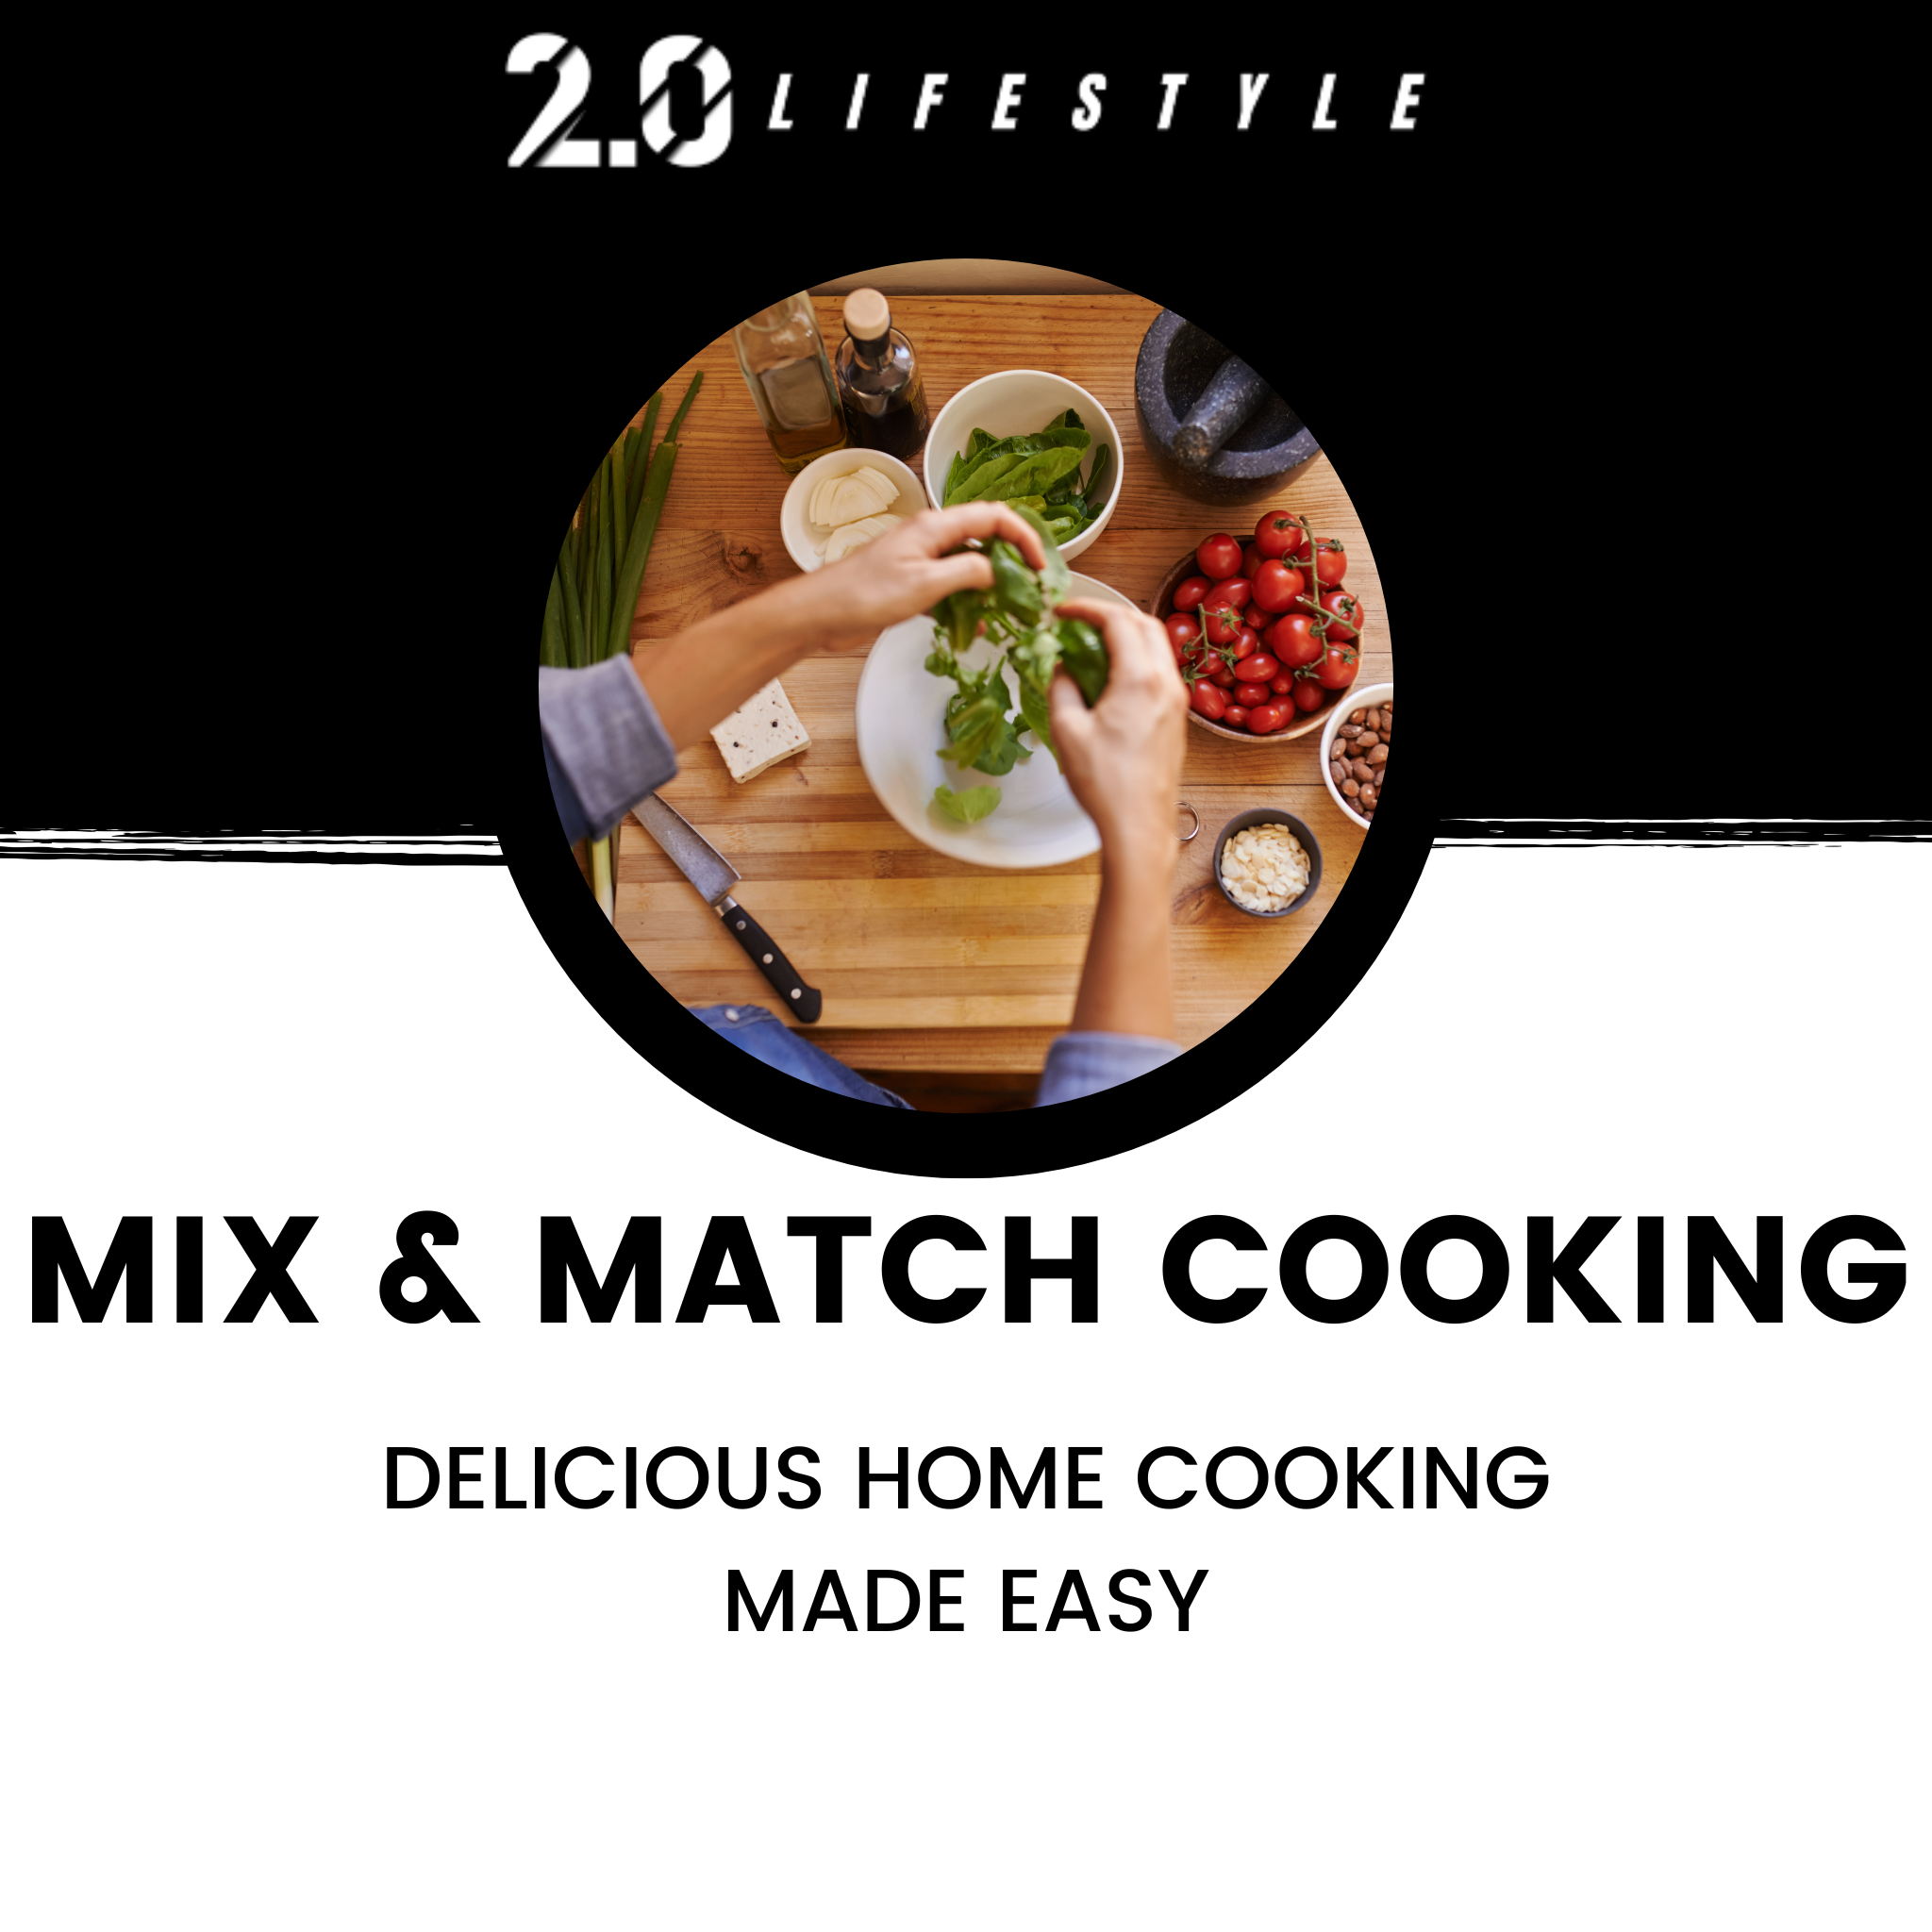 Mix & Match Cooking: Delicious Home Cooking Made Easy